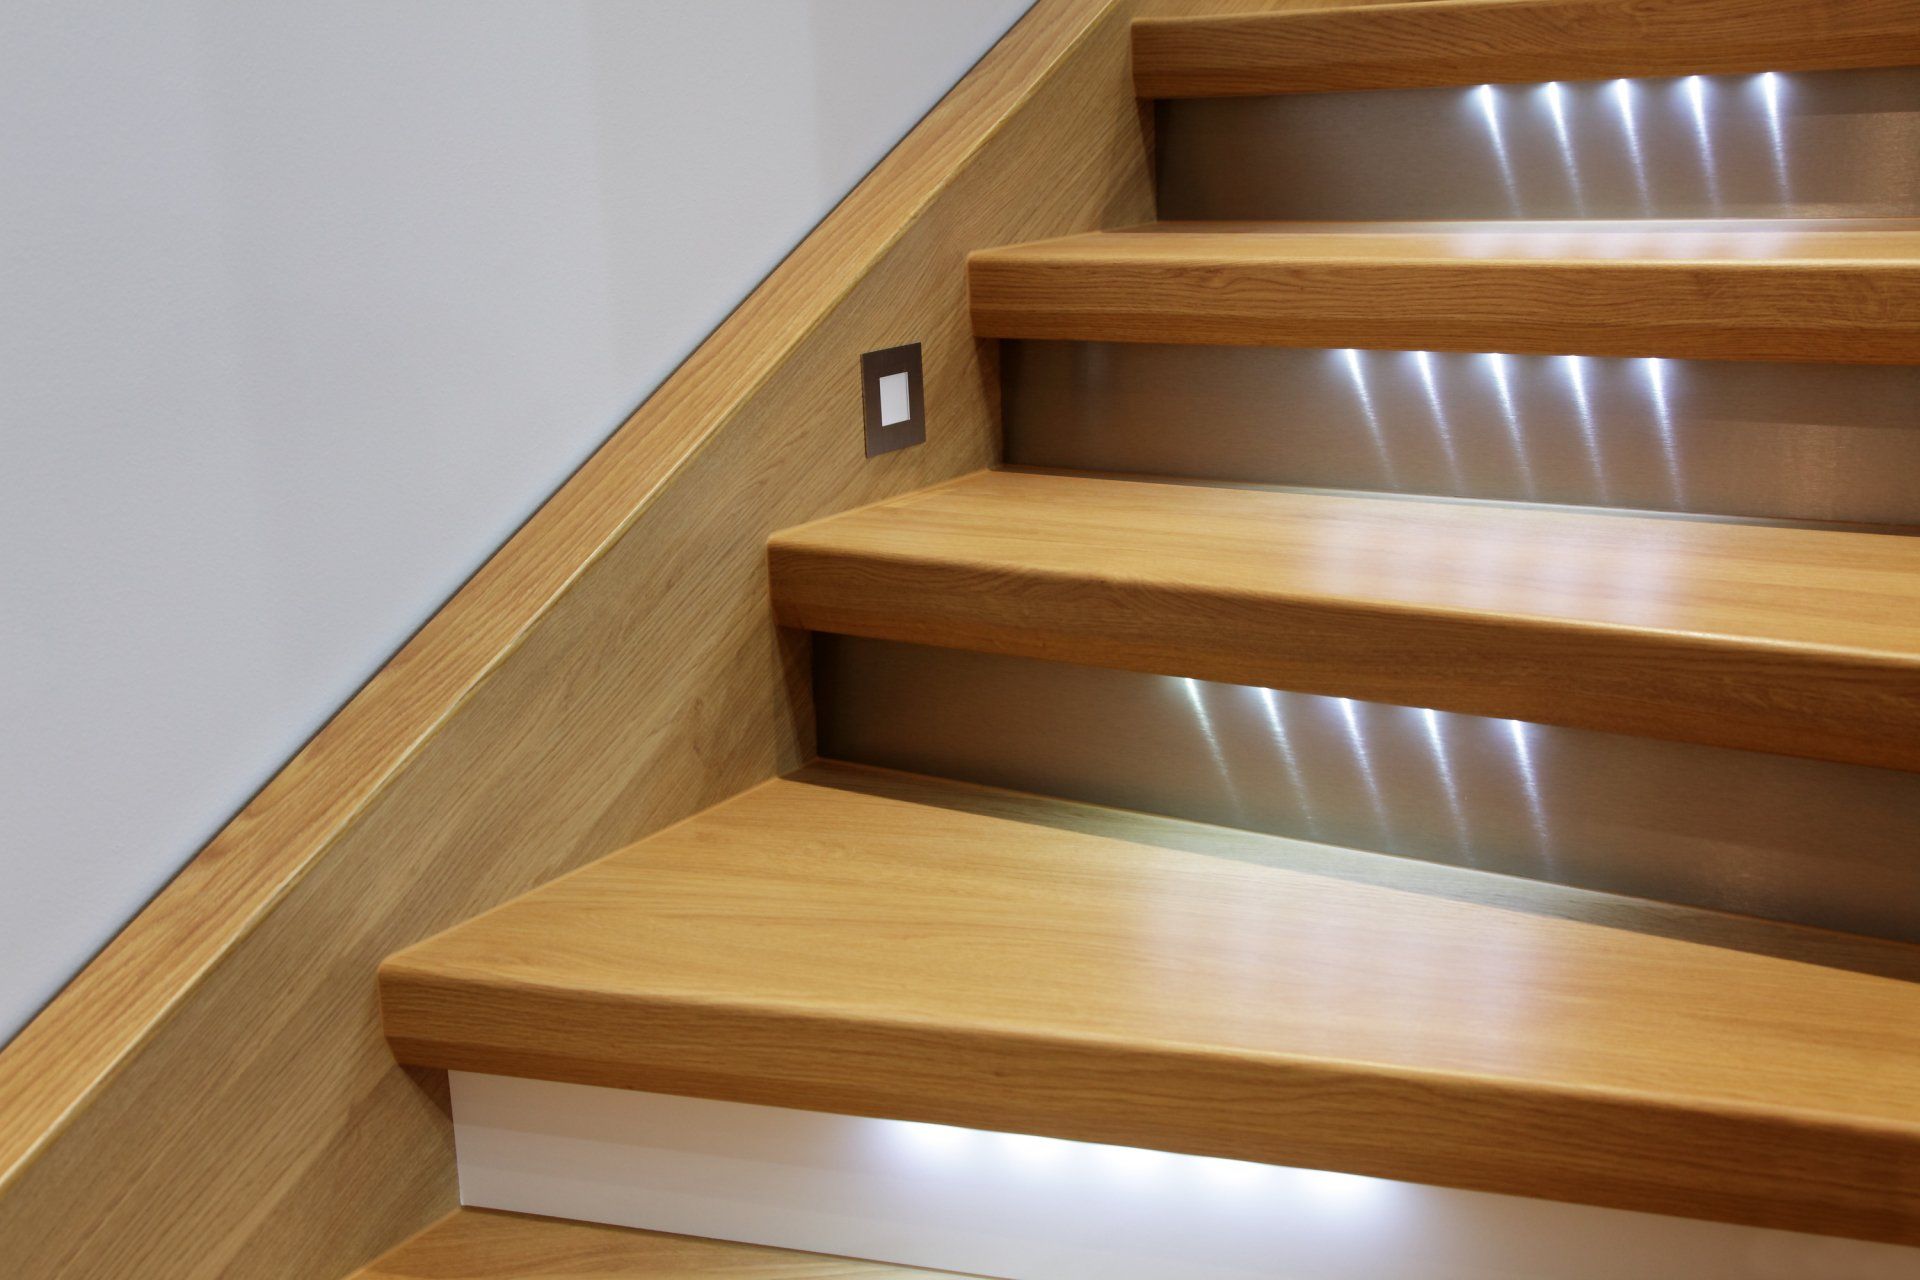 A set of wooden stairs with lights on the steps